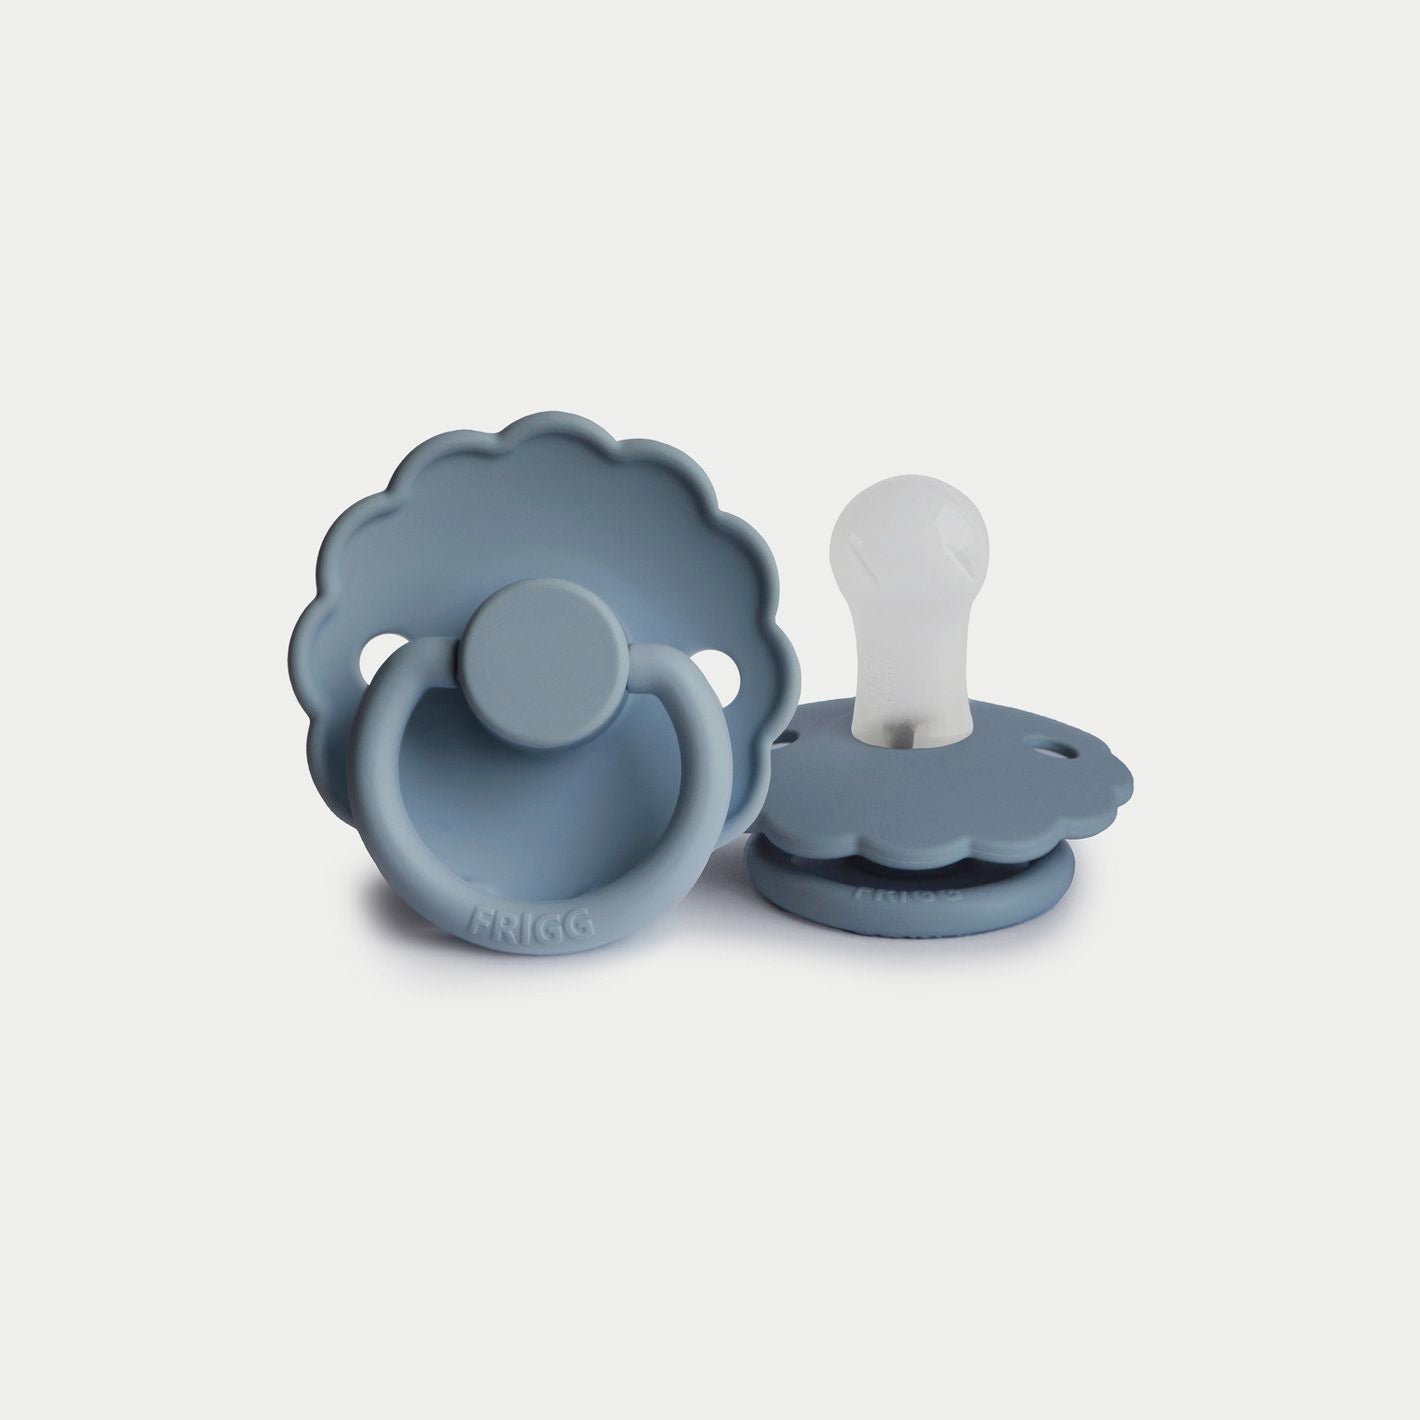 Frigg Daisy Silicone Baby Pacifier 6M-18M, 1Pack, Glacier Blue - Size 2 - Laadlee